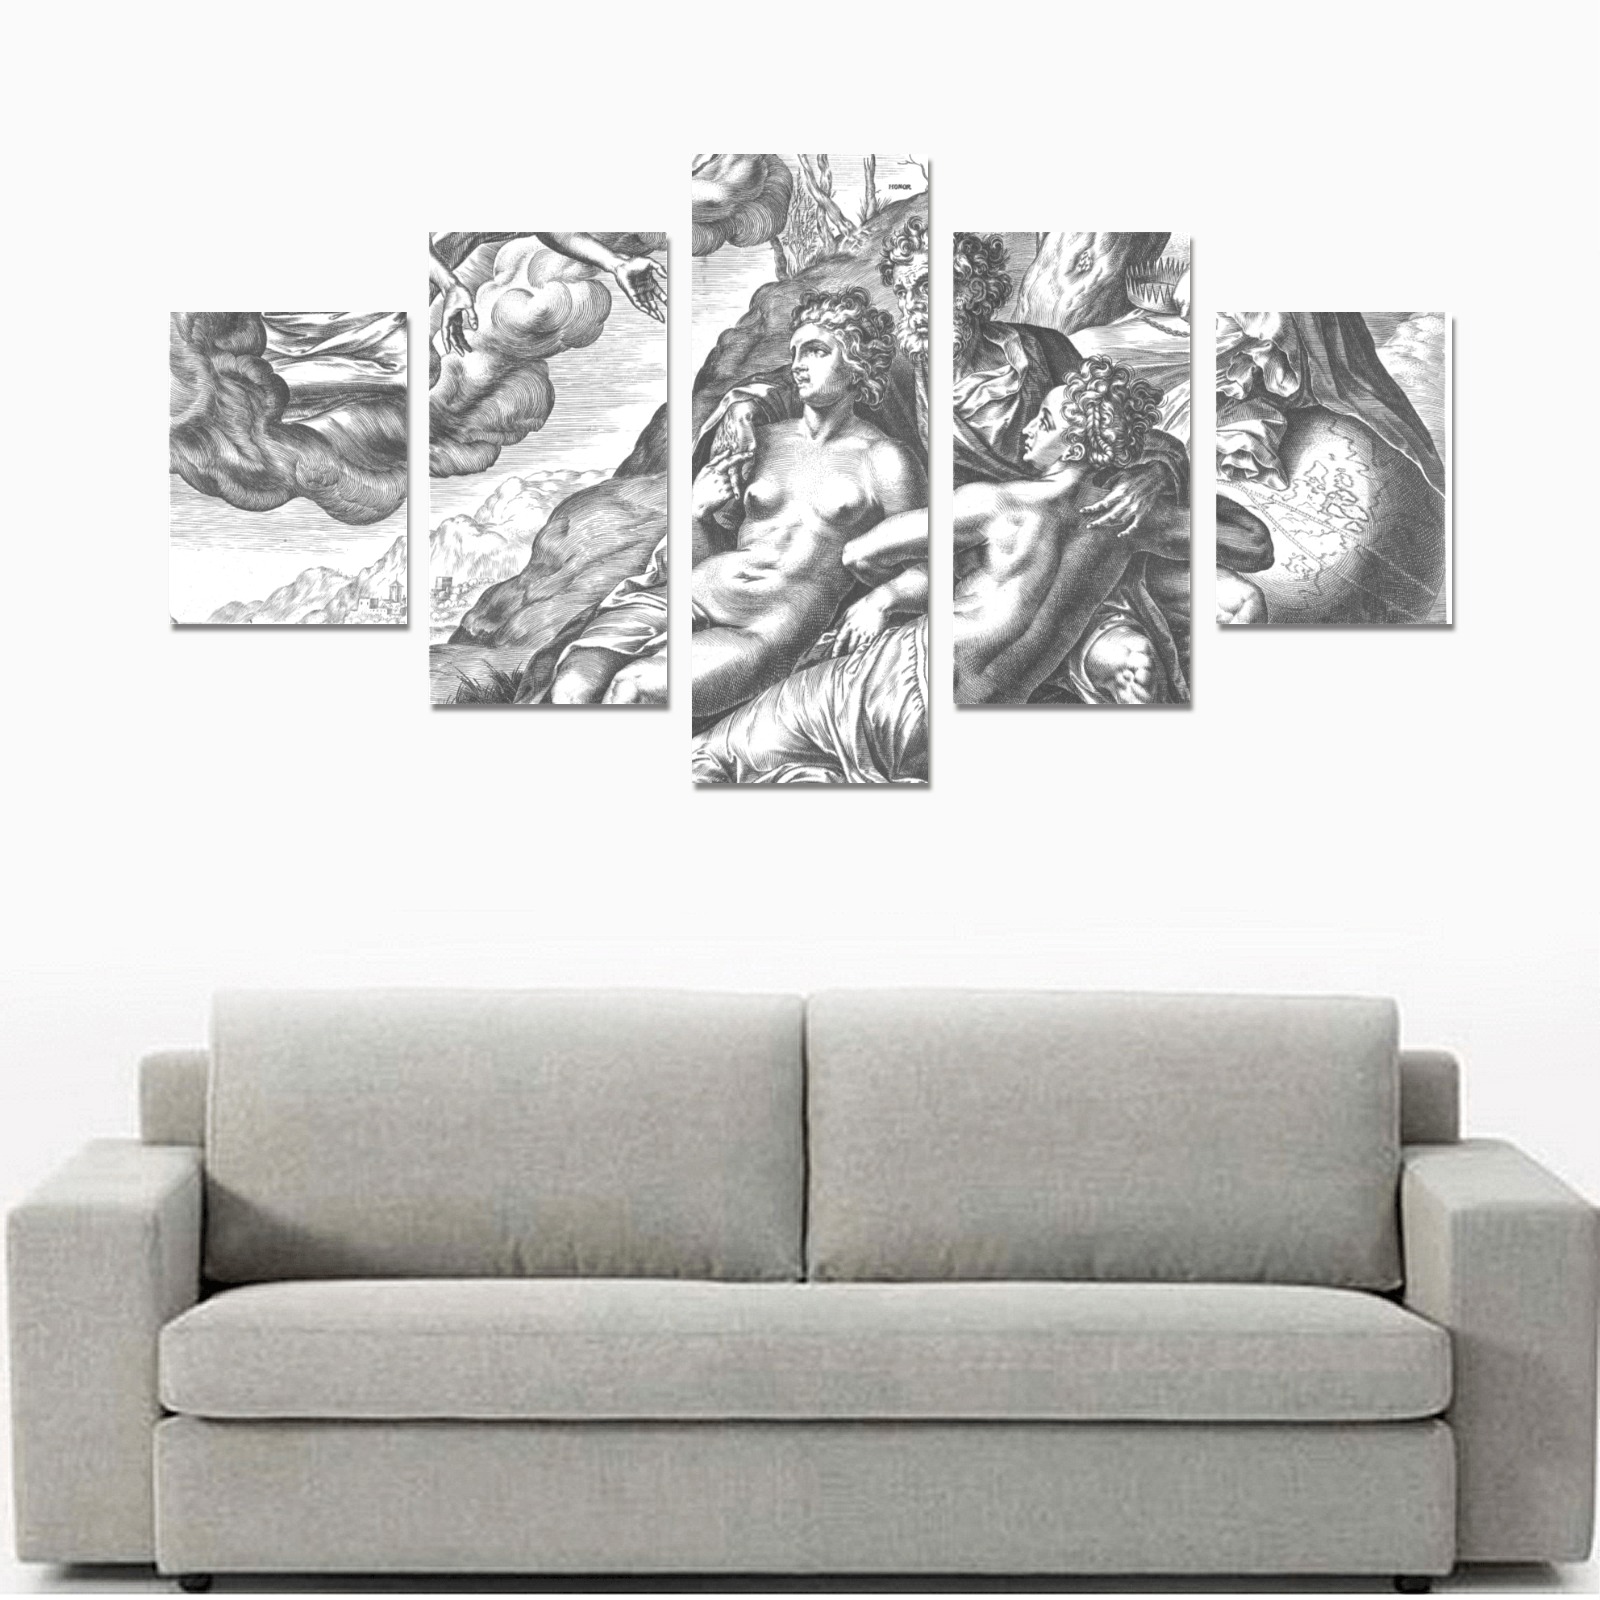 Hieronymus Cock-Allegory of the Immortality of the Virtues Canvas Print Sets B (No Frame)